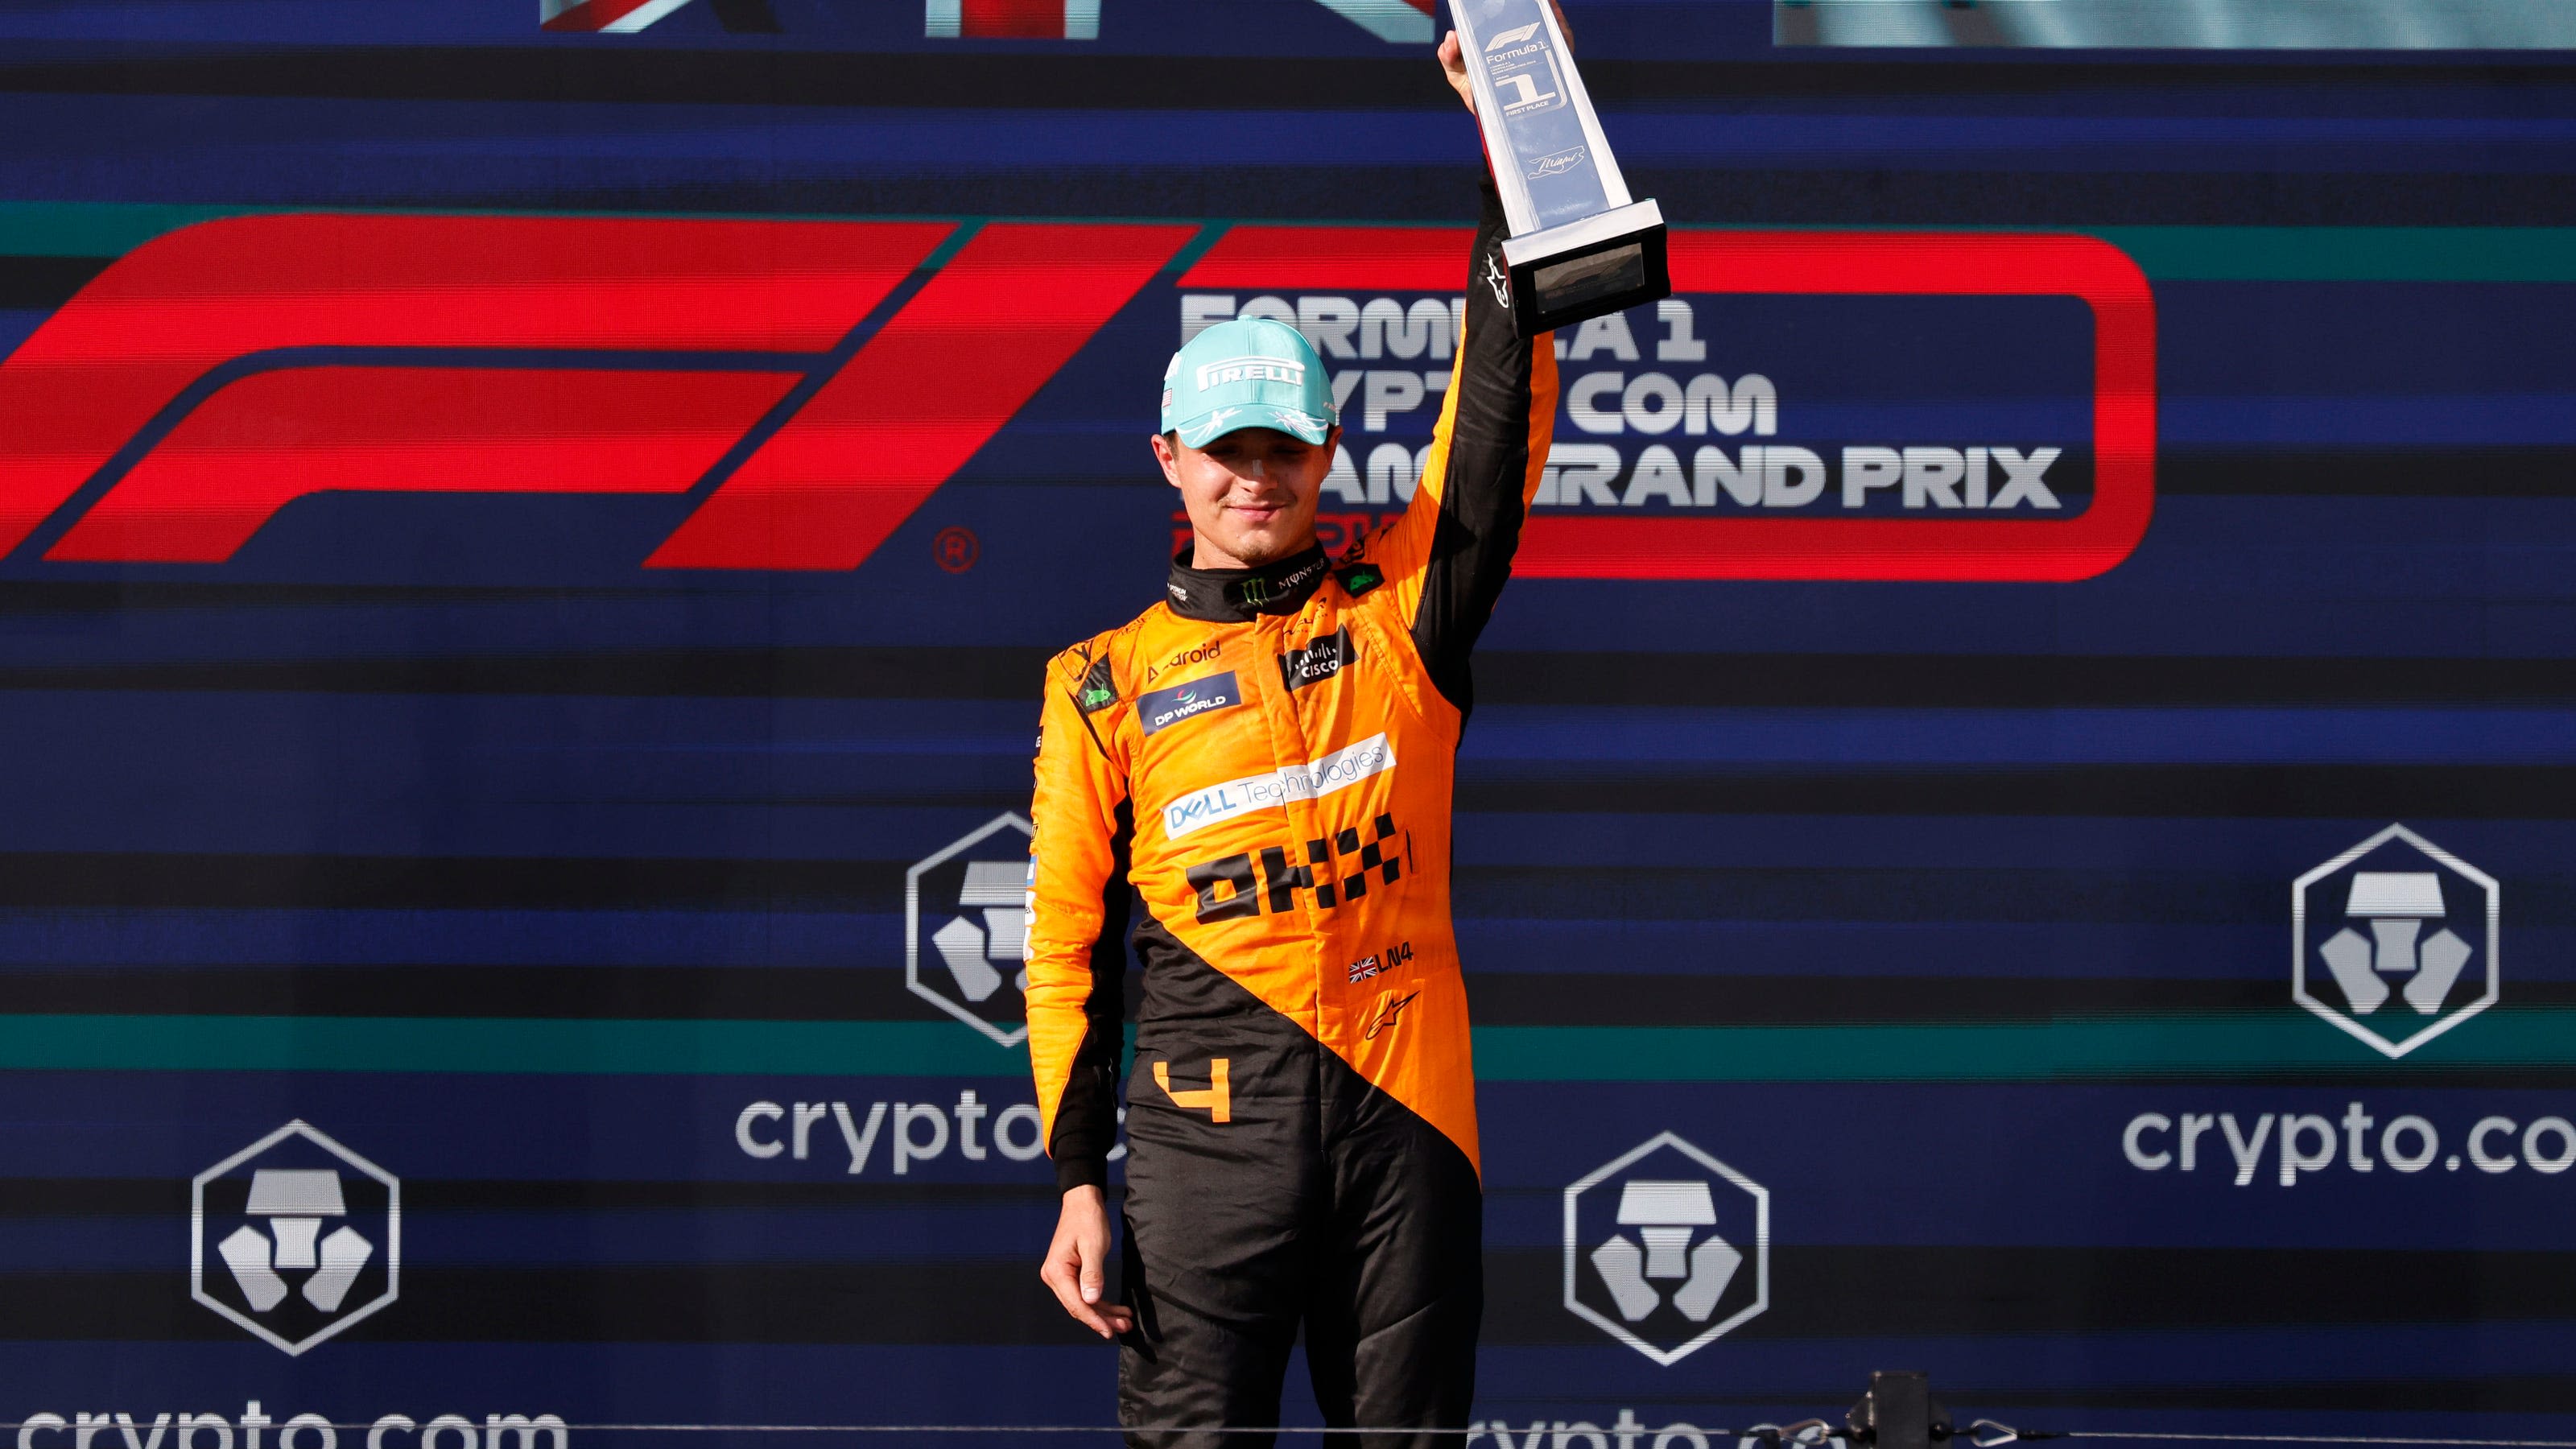 Five things we learned at Miami Grand Prix: Lando Norris’ win will boost Formula 1 in U.S.